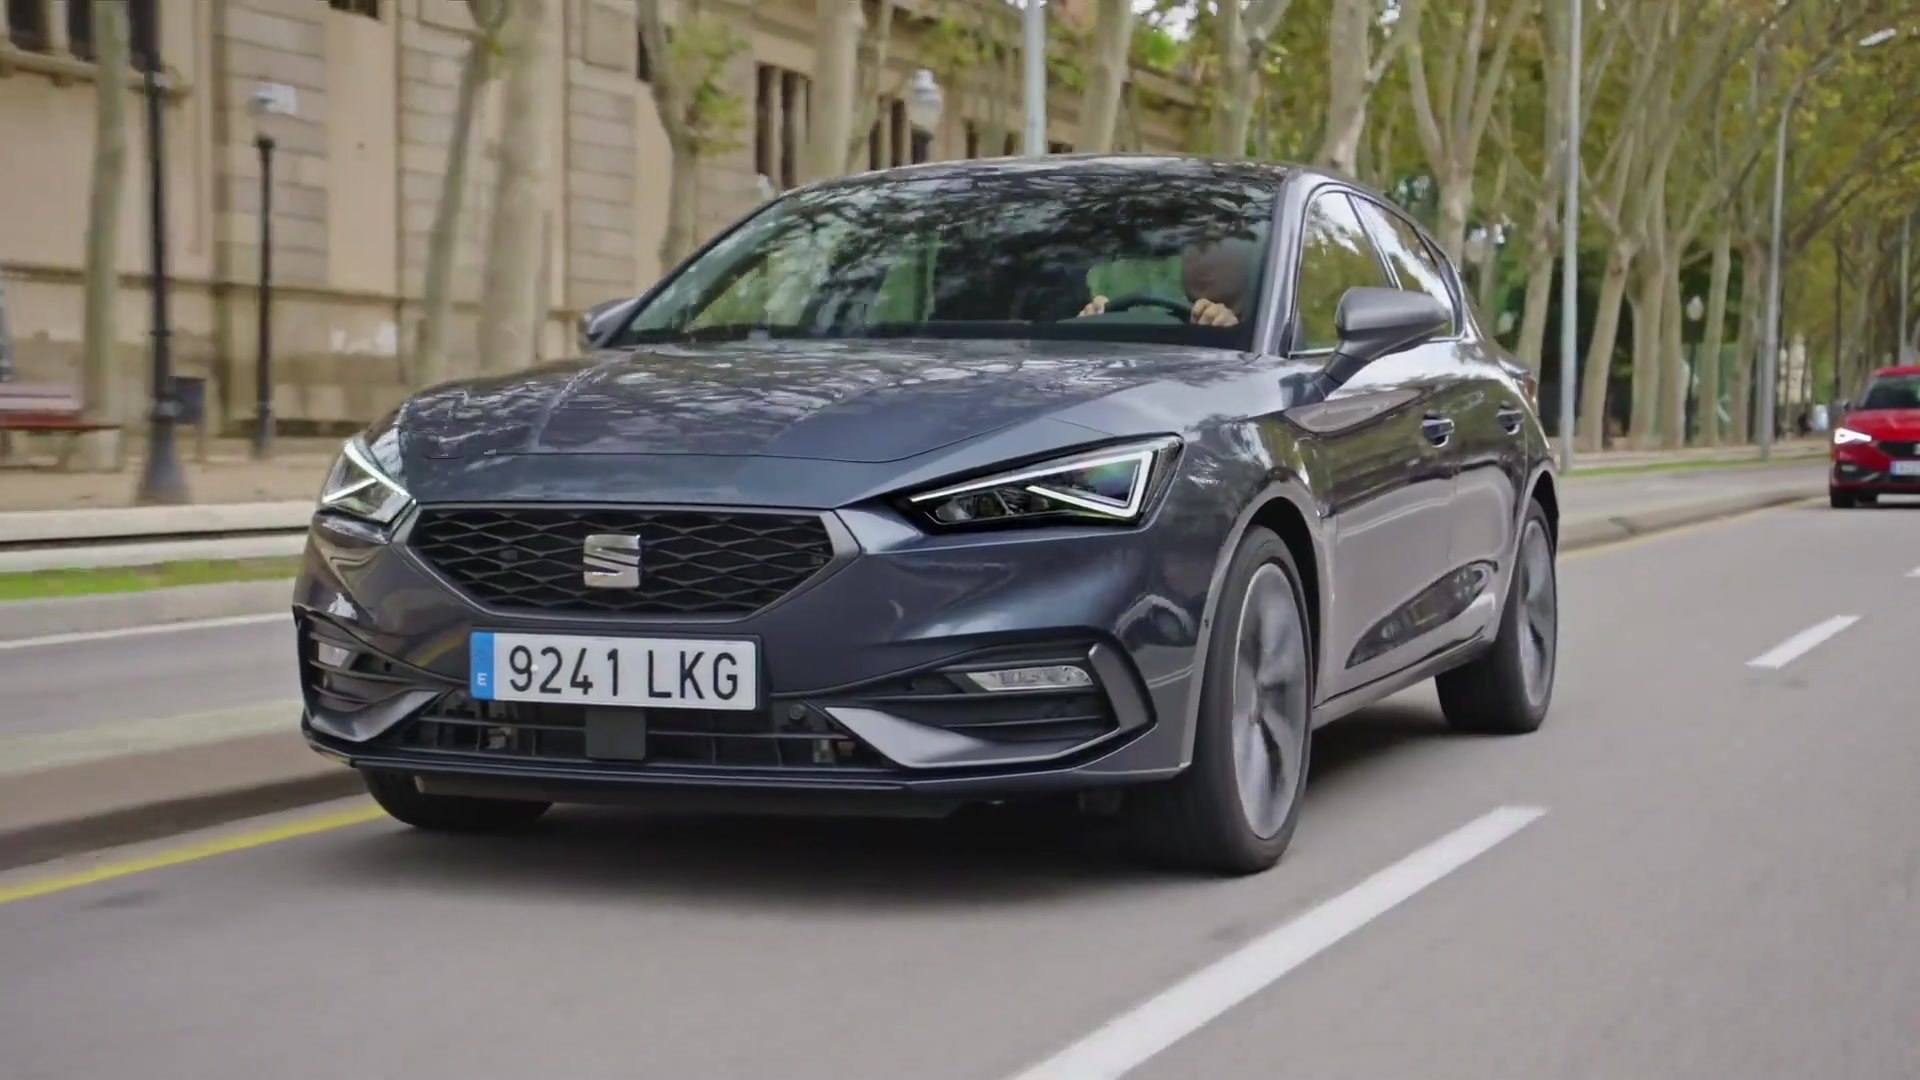 New SEAT Leon e-HYBRID in Magnetic Tech Driving Video - video Dailymotion